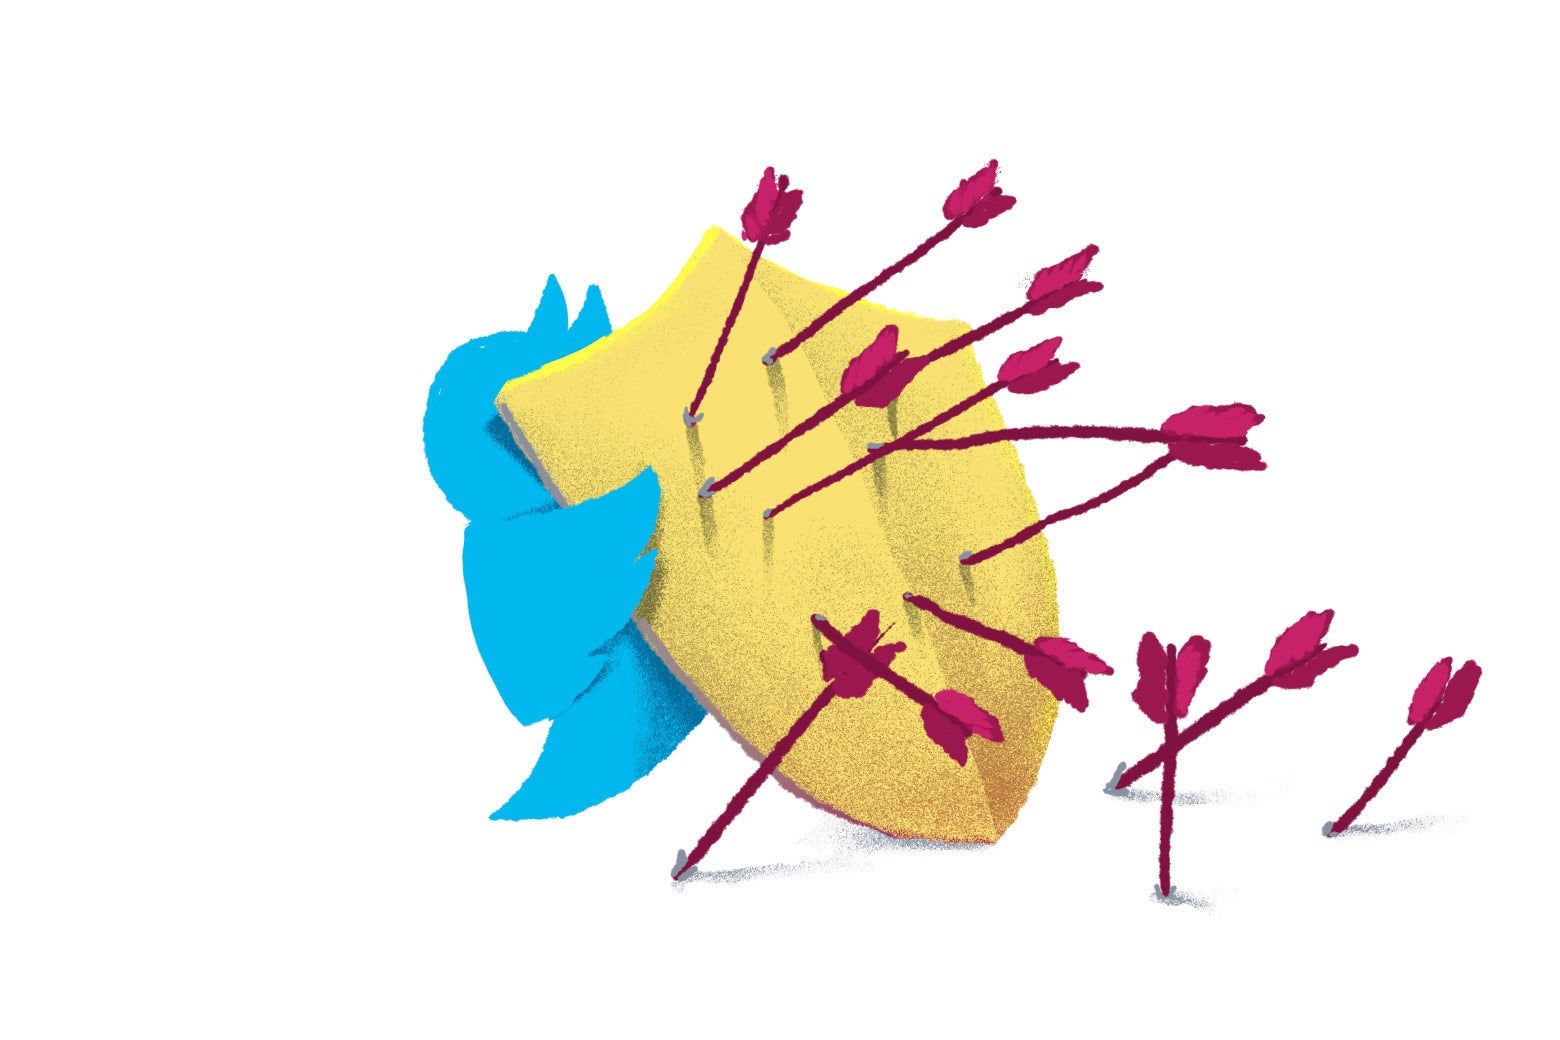 Illustration of a Twitter bird holding a shield with arrows stuck in it.